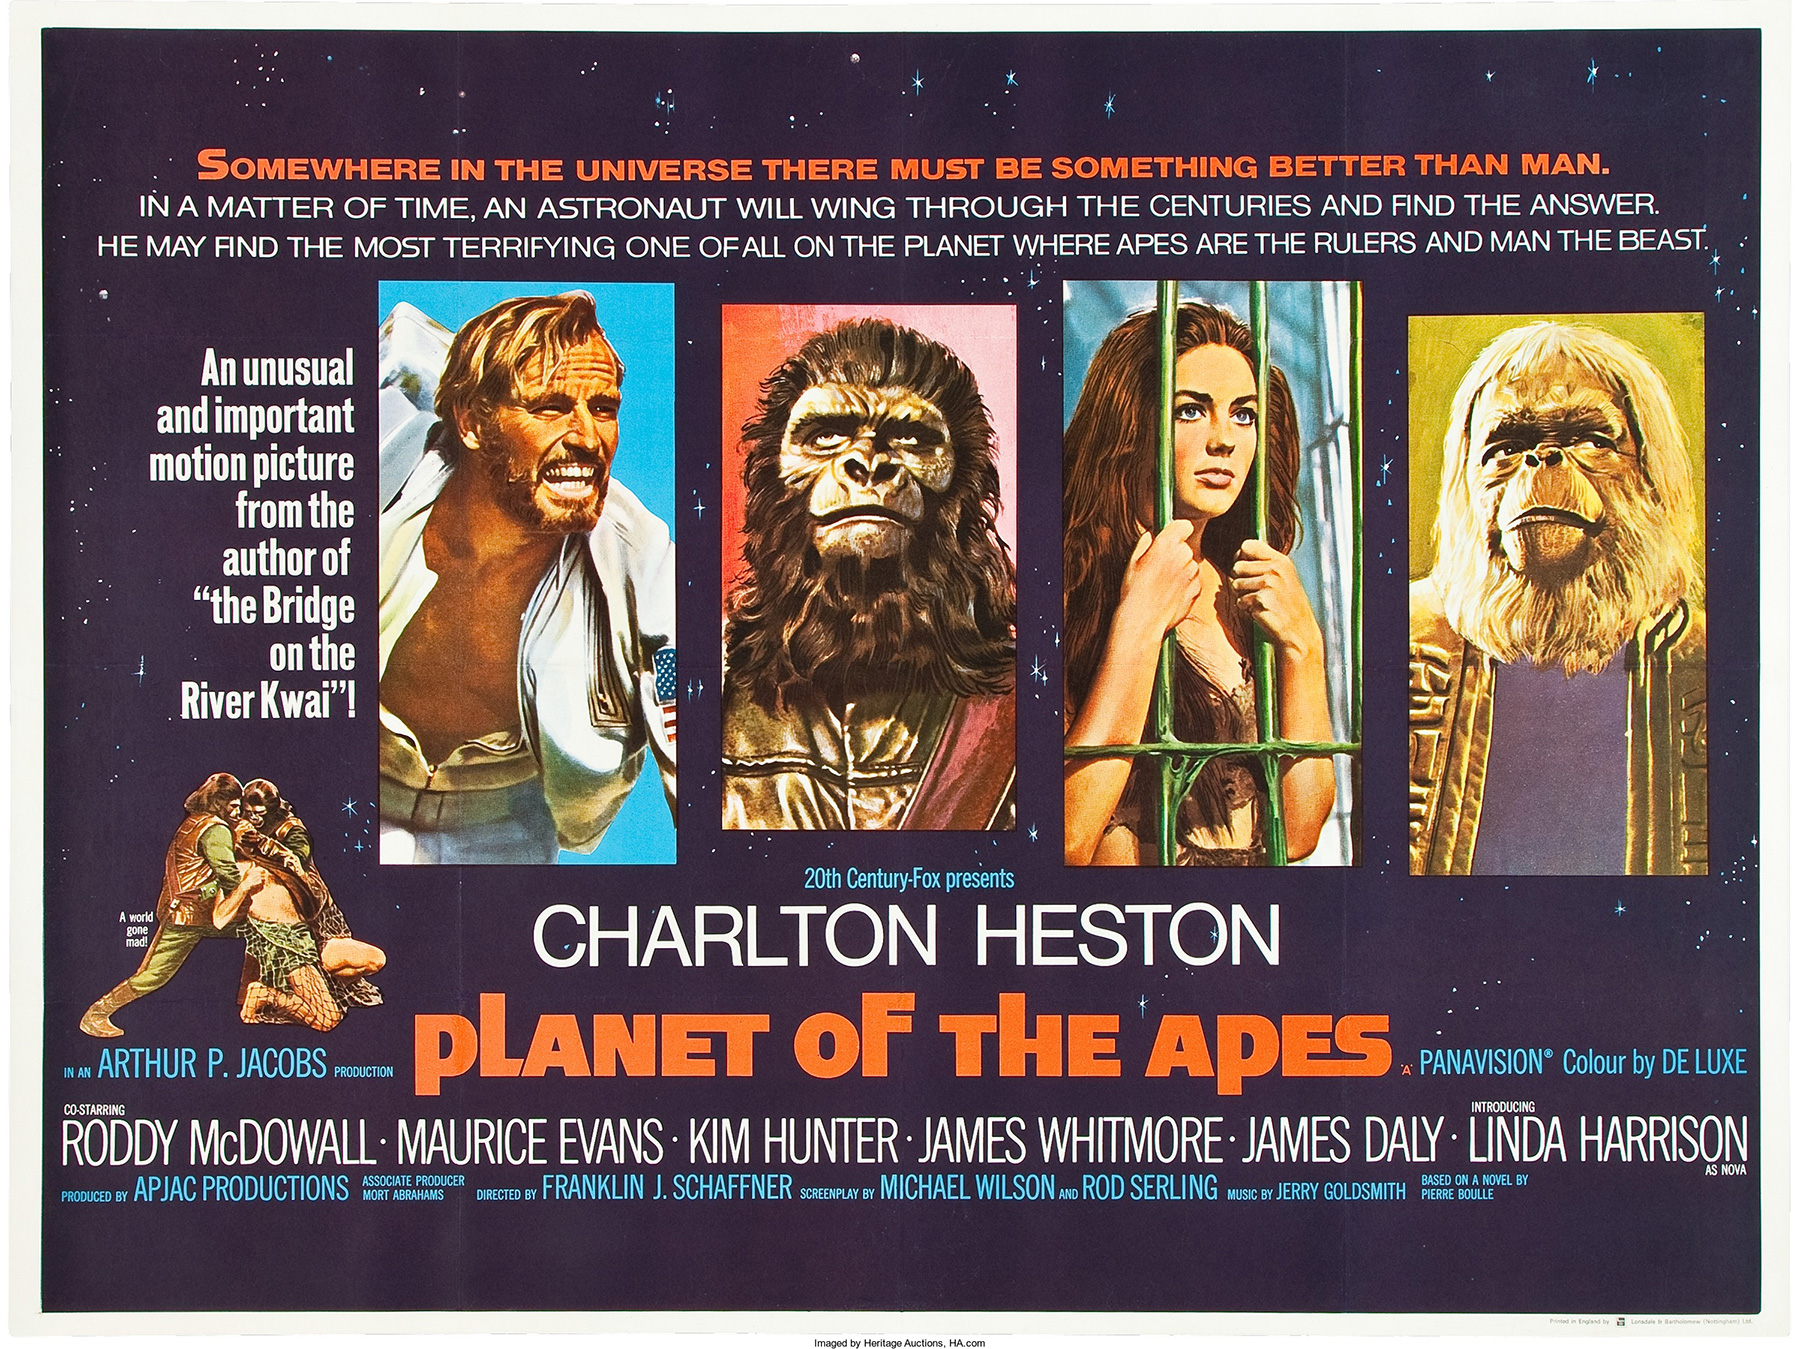 Revisiting 'Planet of the Apes'